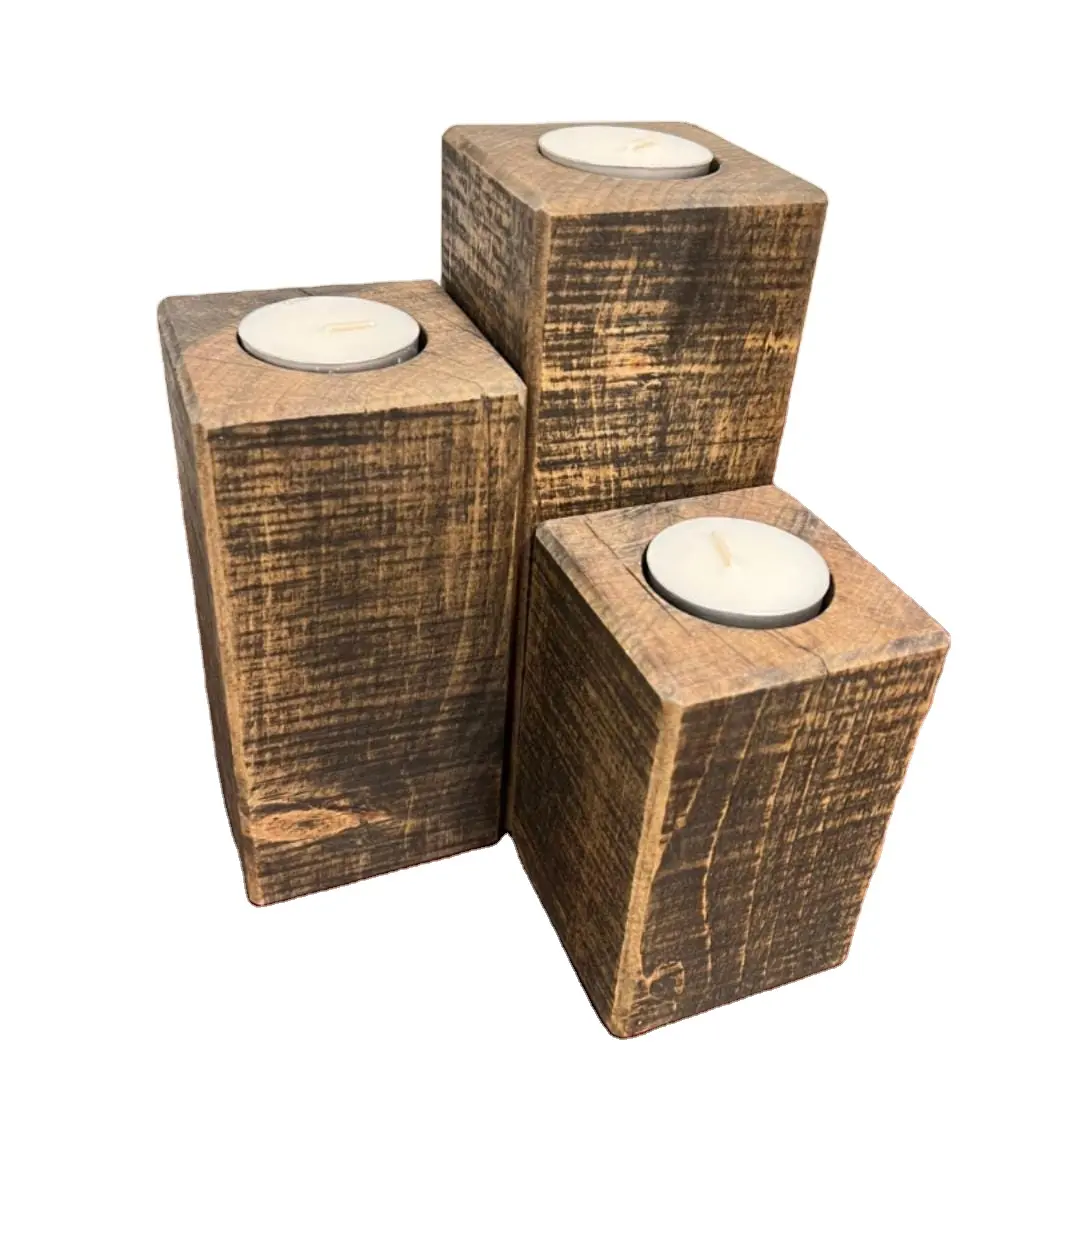 Antique Wooden Square Shape Tea Light Candle Holder Handmade Wooden Candle Holder for use Home Decorative item and gifting